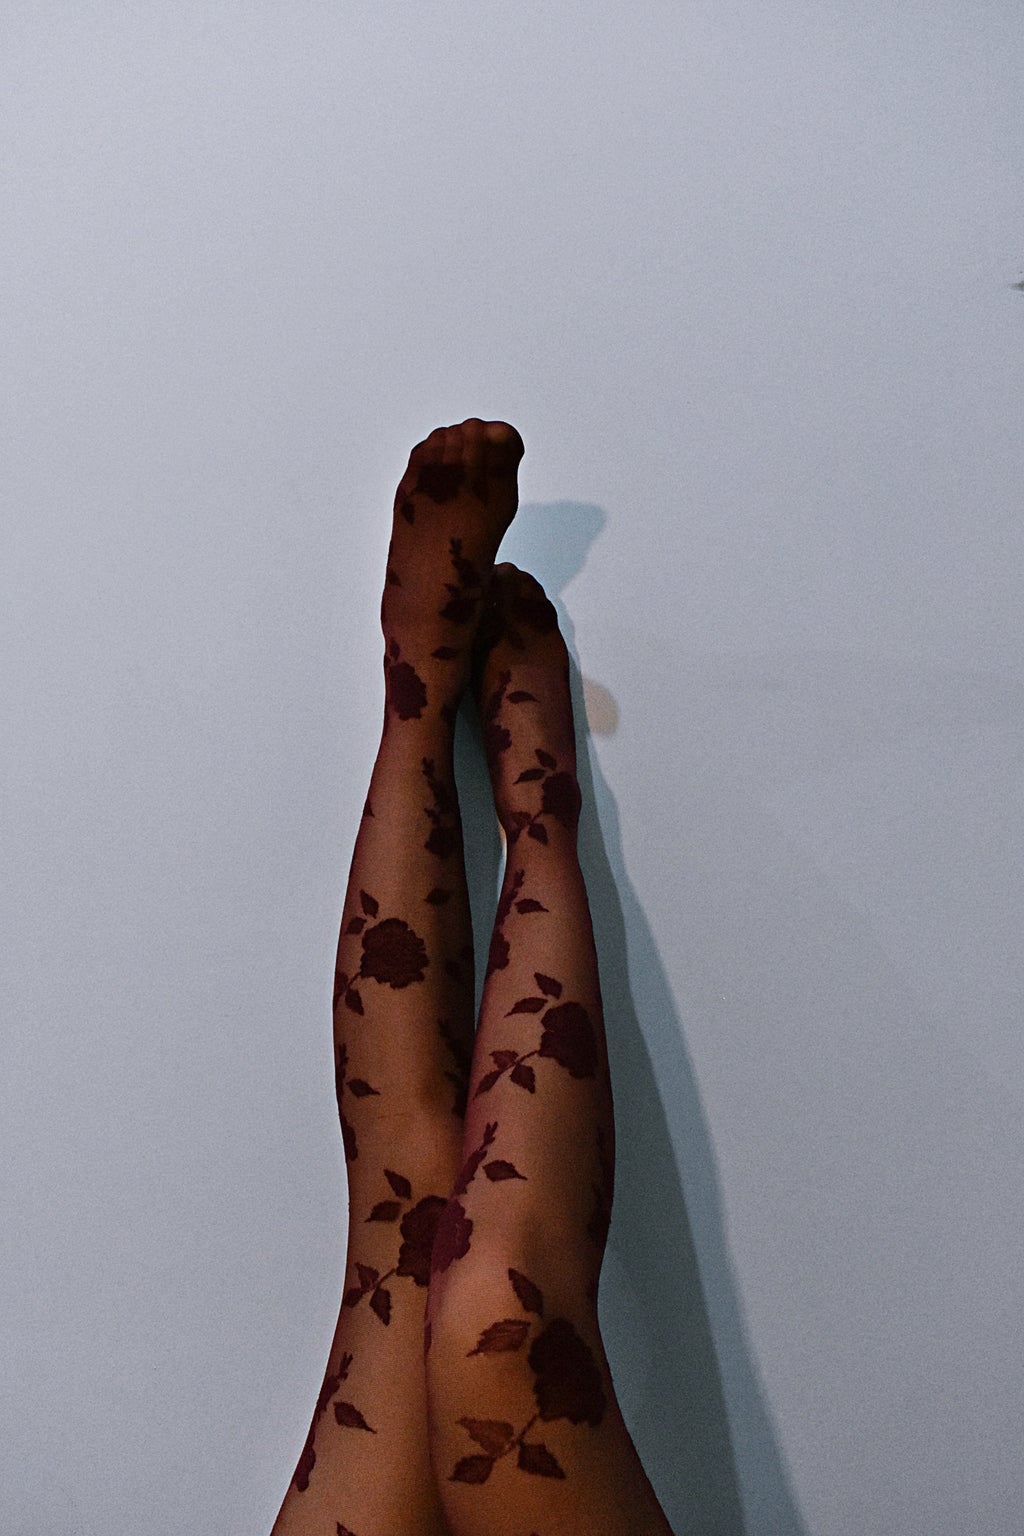 Photo Of Woman Wearing Floral Stockings